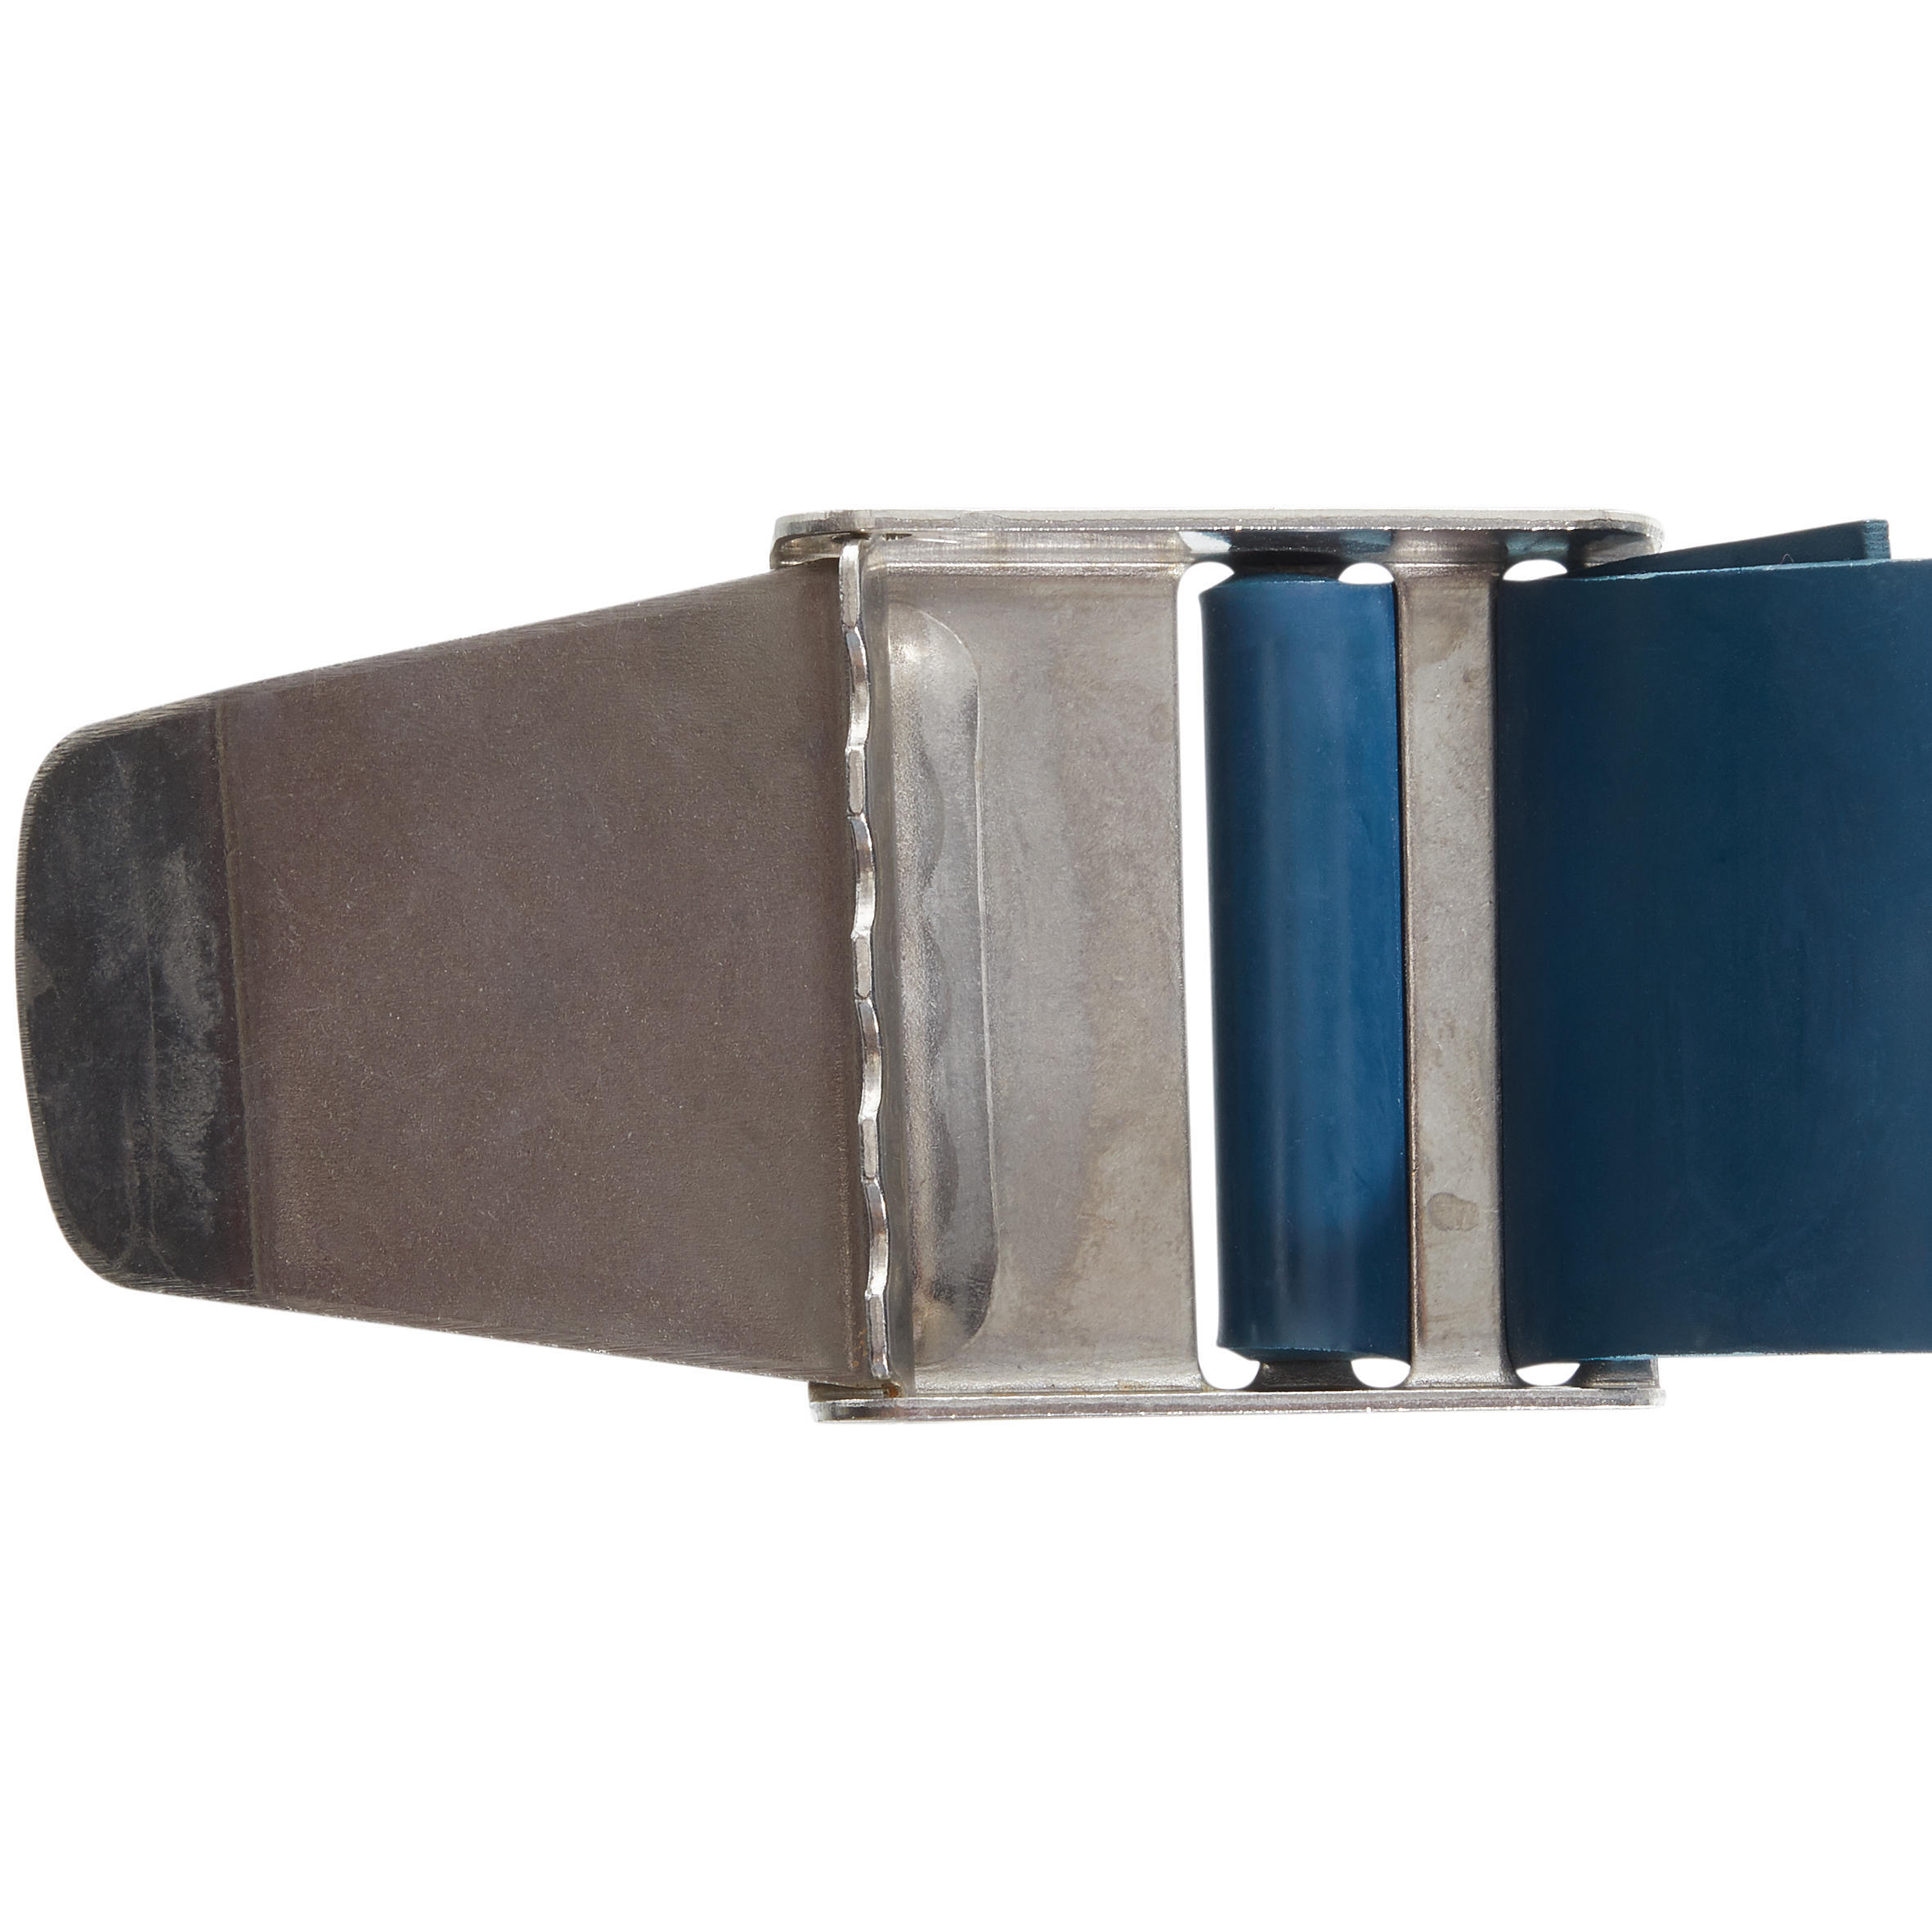 Freediving FRD500 rubber weight belt with metal buckle - Blue 3/4